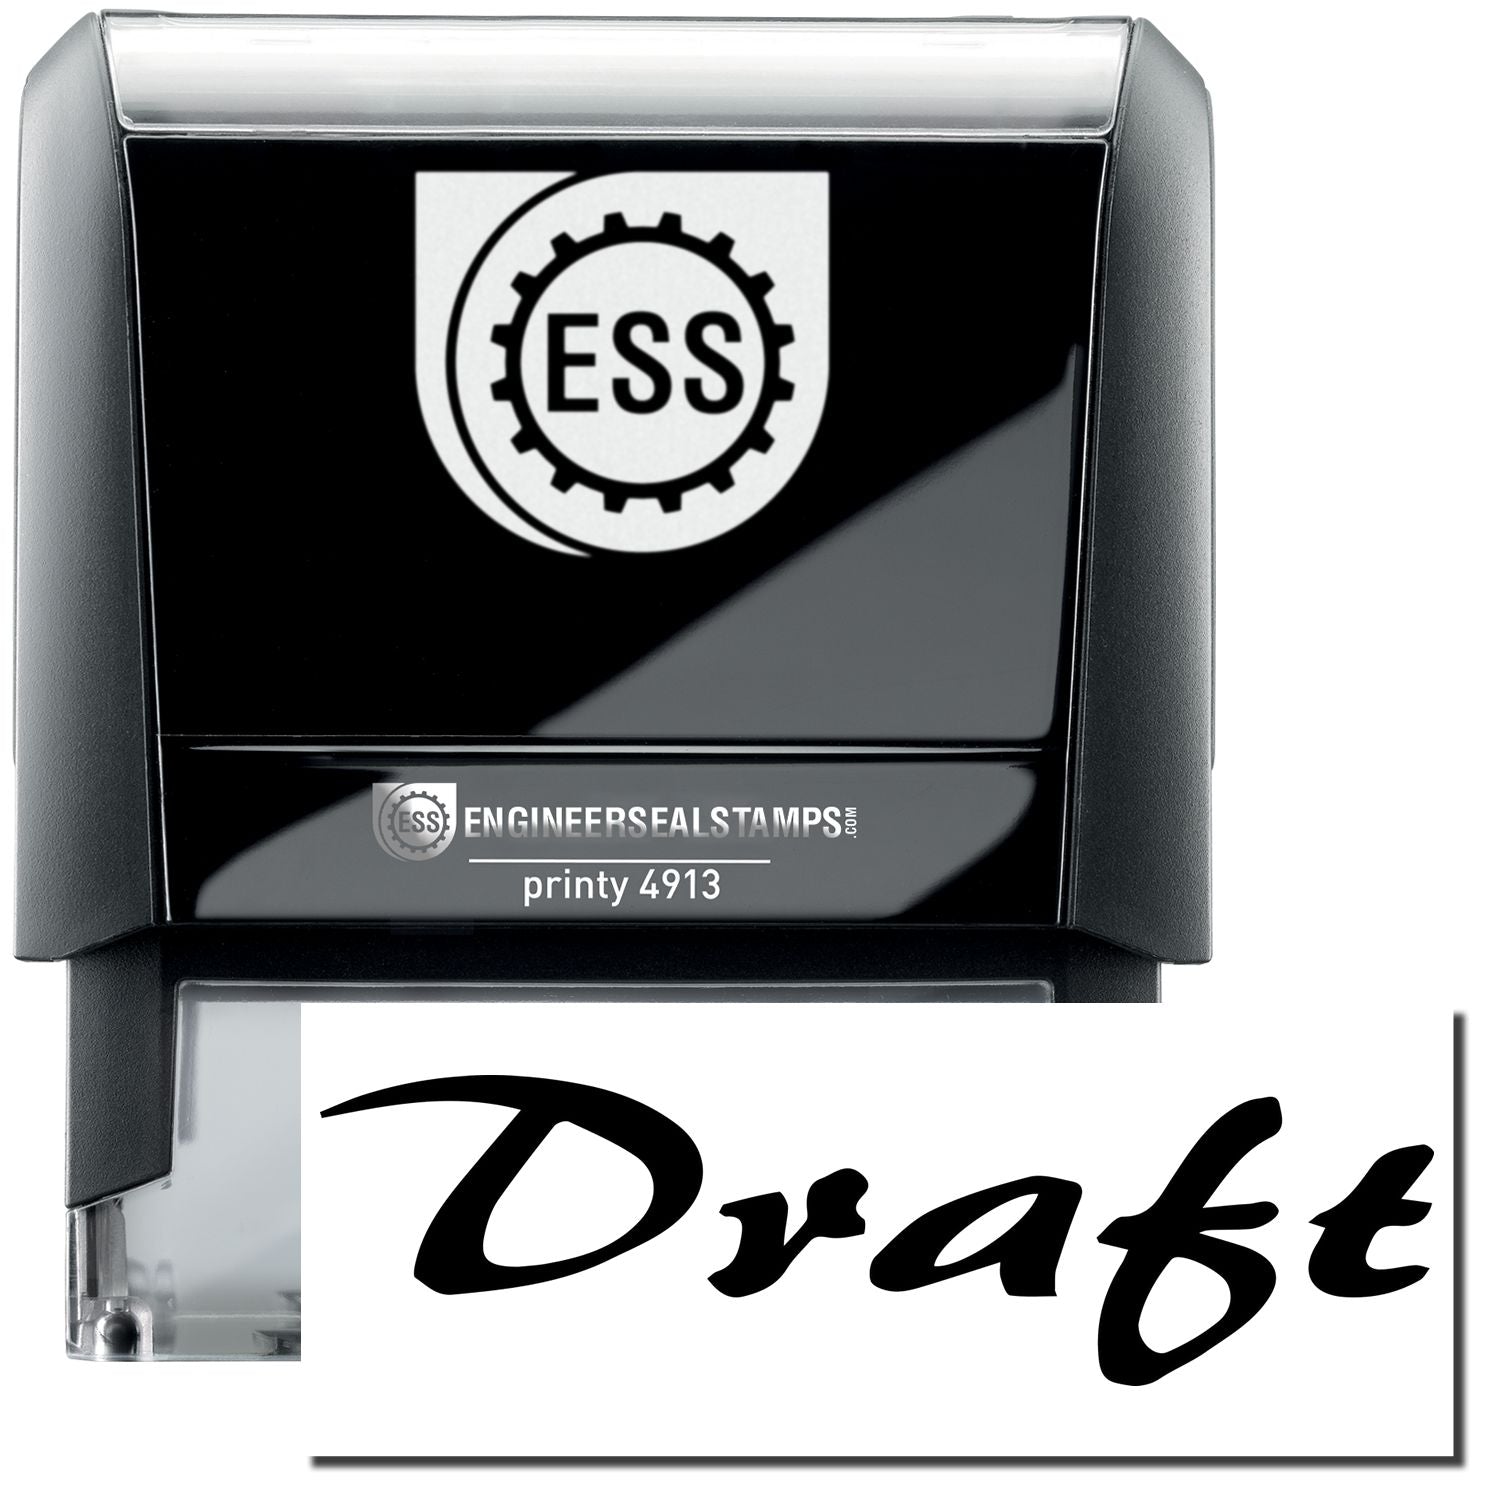 A self-inking stamp with a stamped image showing how the text "Draft" in a large cursive font is displayed by it after stamping.